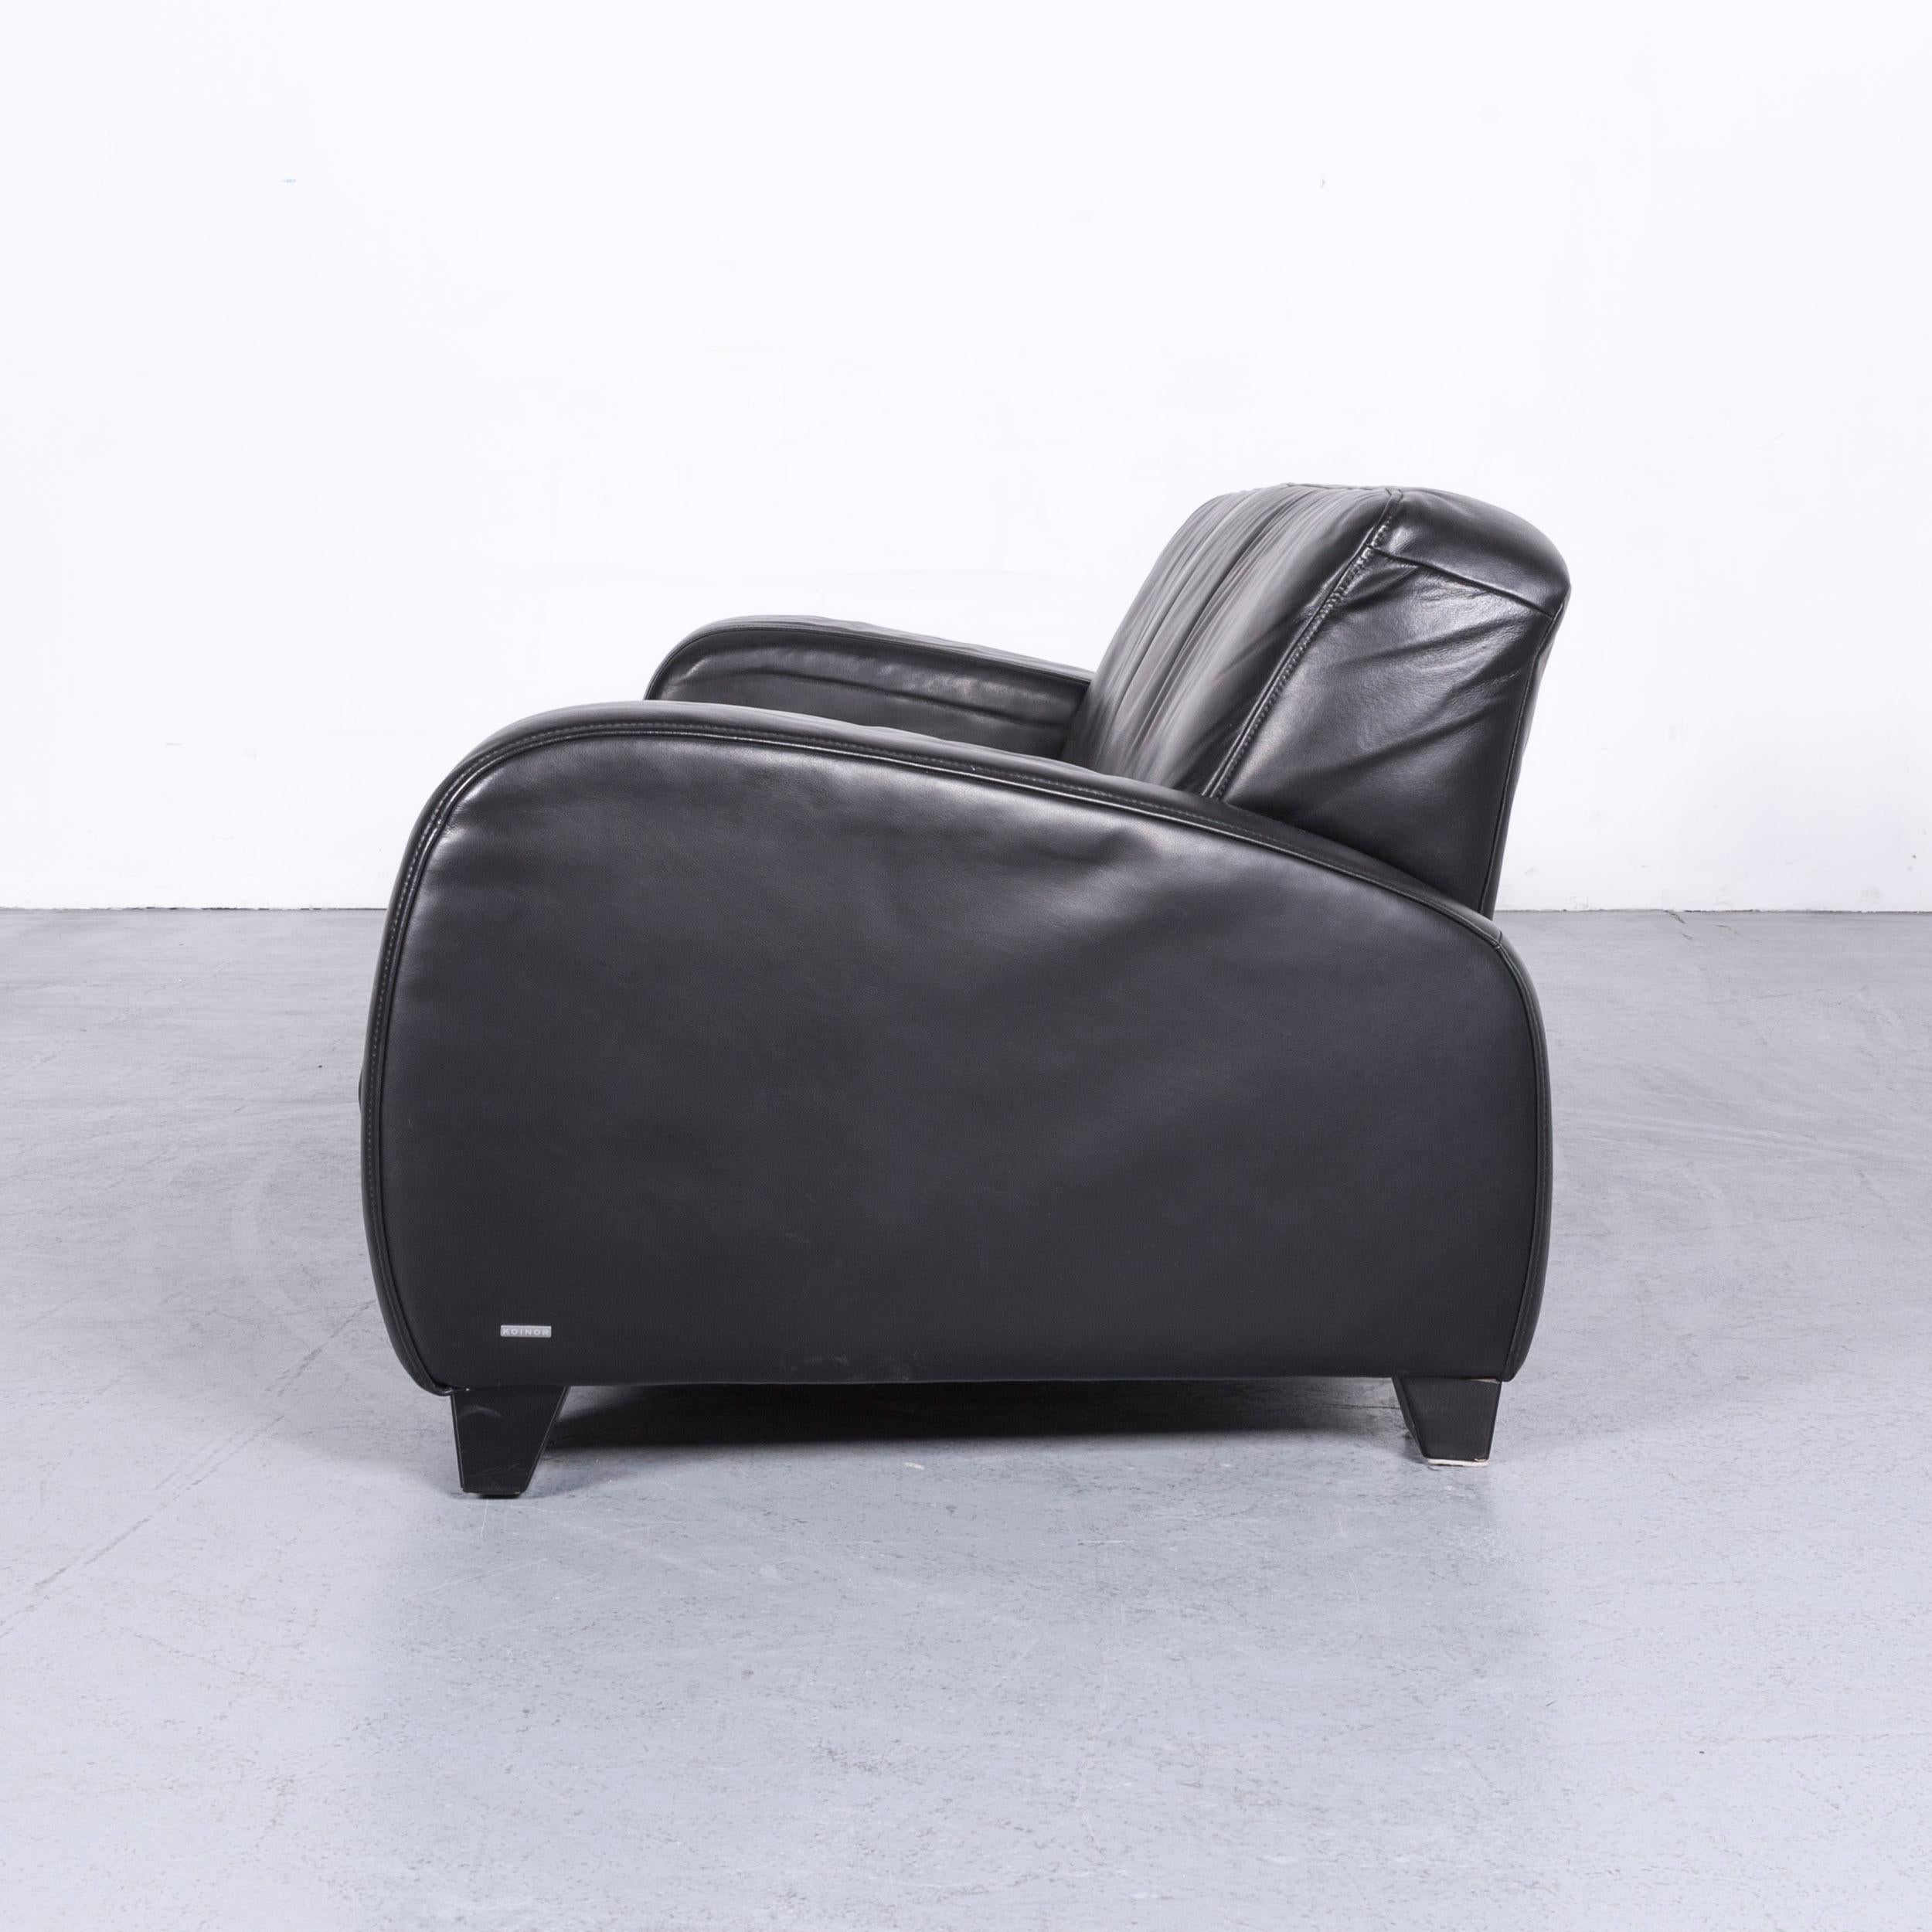 Koinor Designer Leather Sofa Black Two-Seat Couch 5